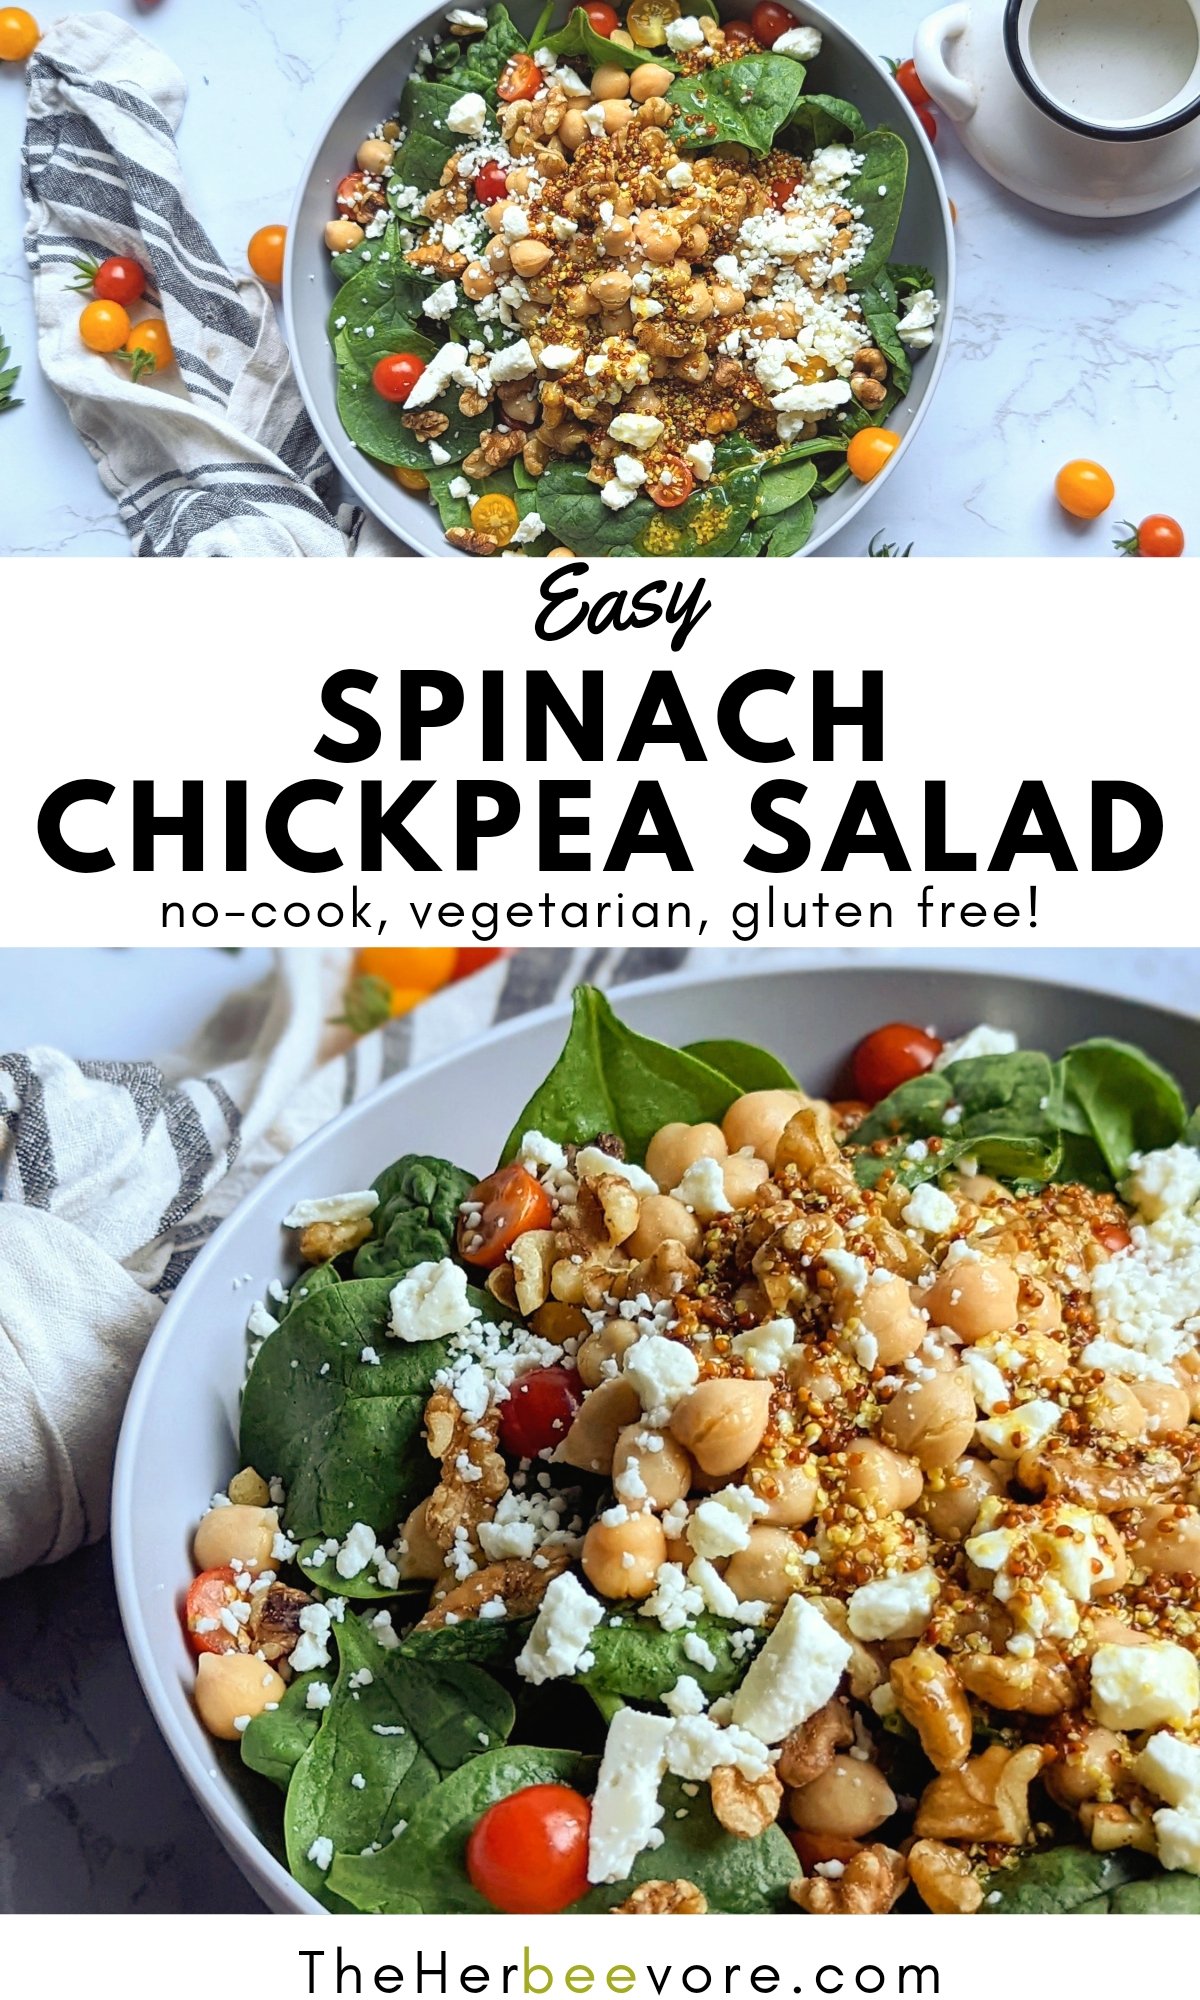 spinach chickpea salad recipe vegetarian gluten free summer salads with garden tomatoes walnuts and feta cheese with homemade lemon dressing